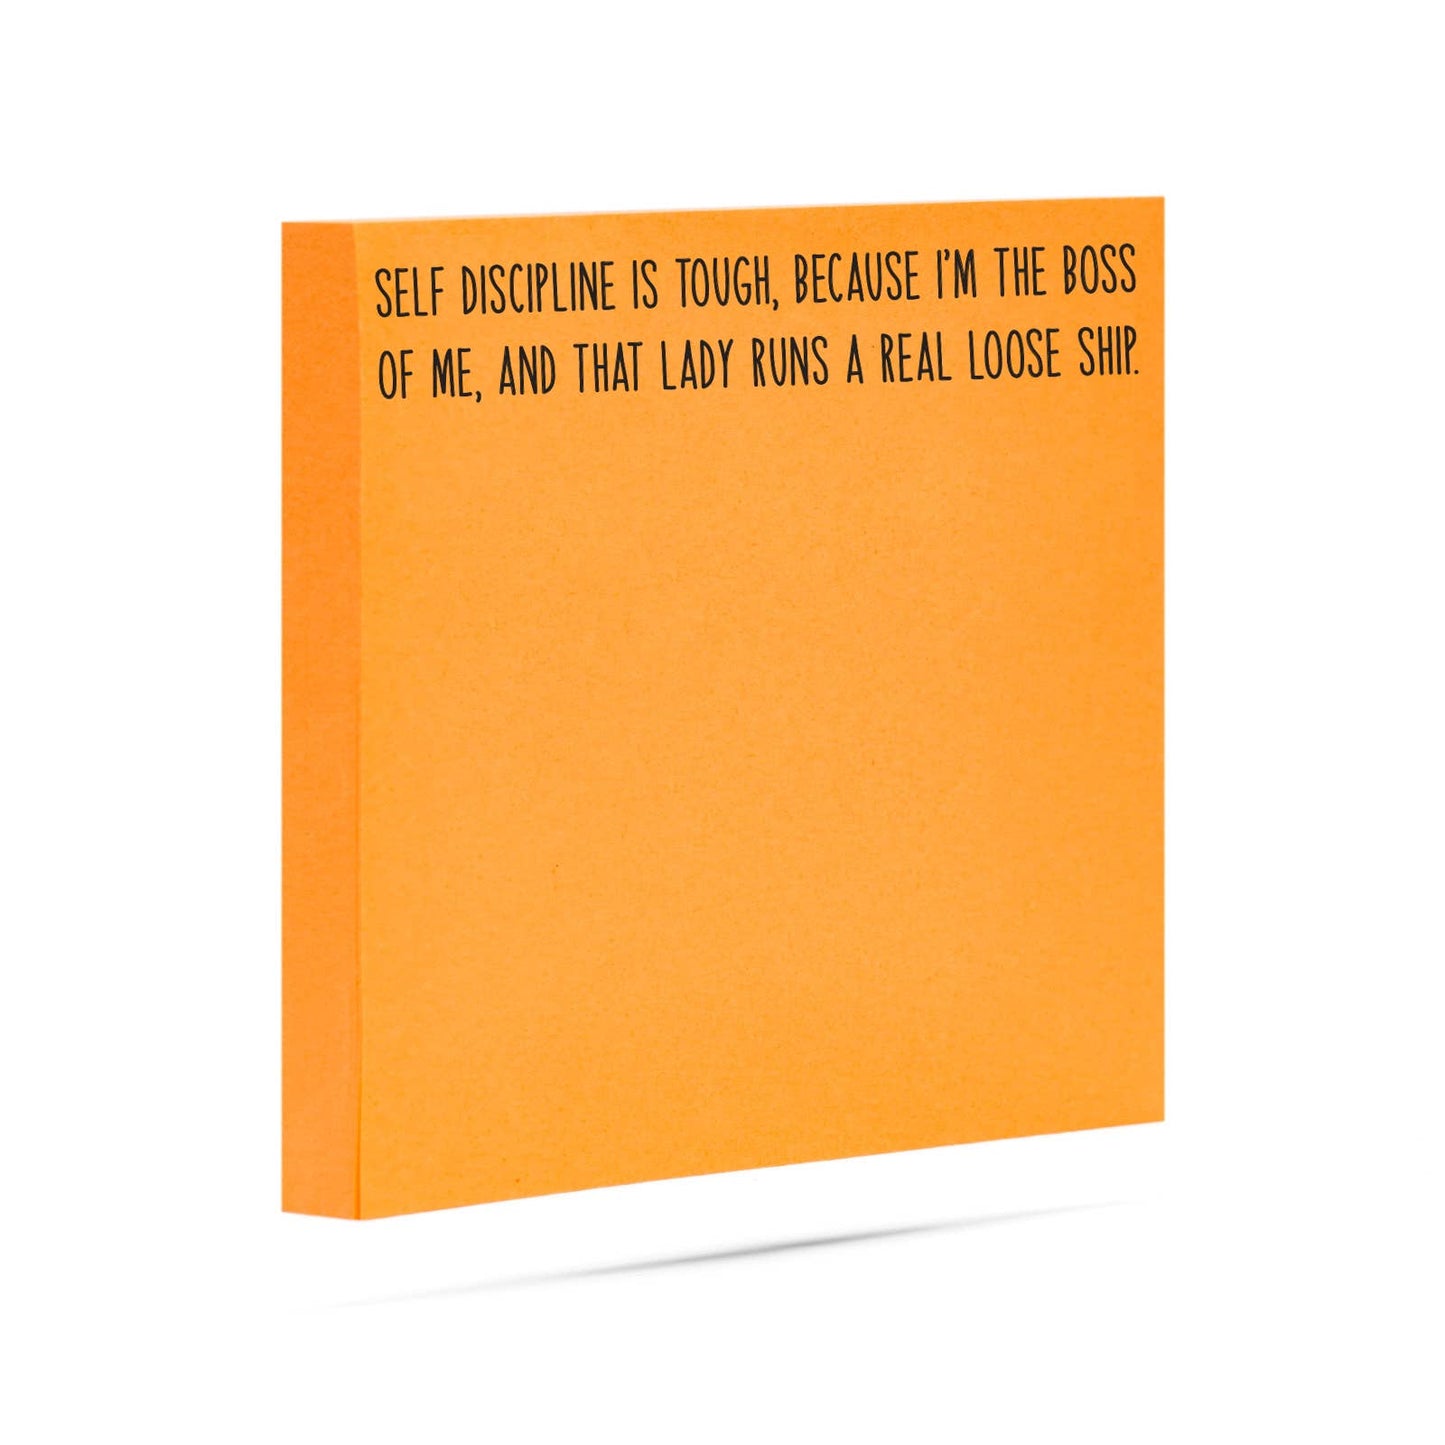 Self discipline is tough | funny sticky notes with sayings